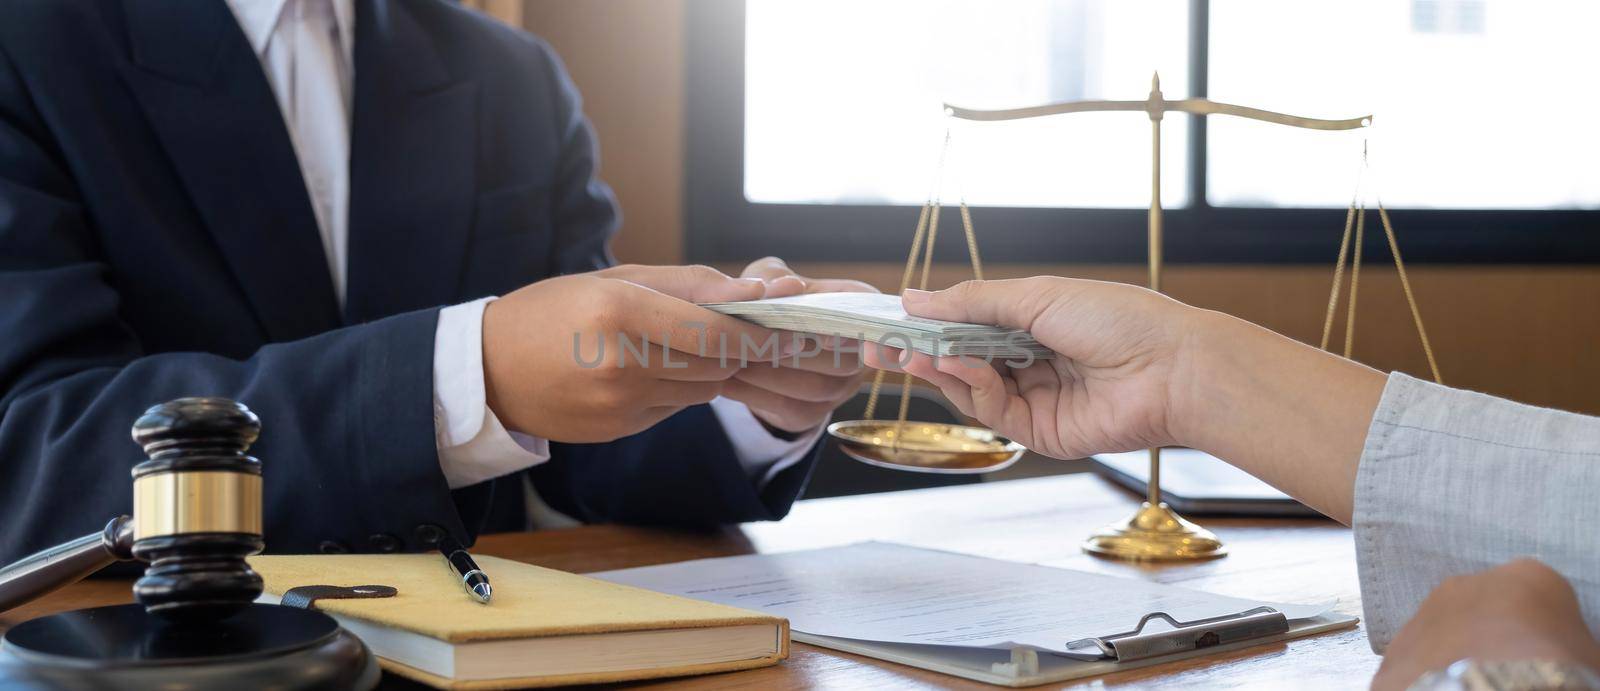 lawyer or judge is taking a bribe. In the client's courtroom at the lawyer's office In order to bribe to gain an advantage in the form of lawsuits, the concept of bribery and corruption in law.